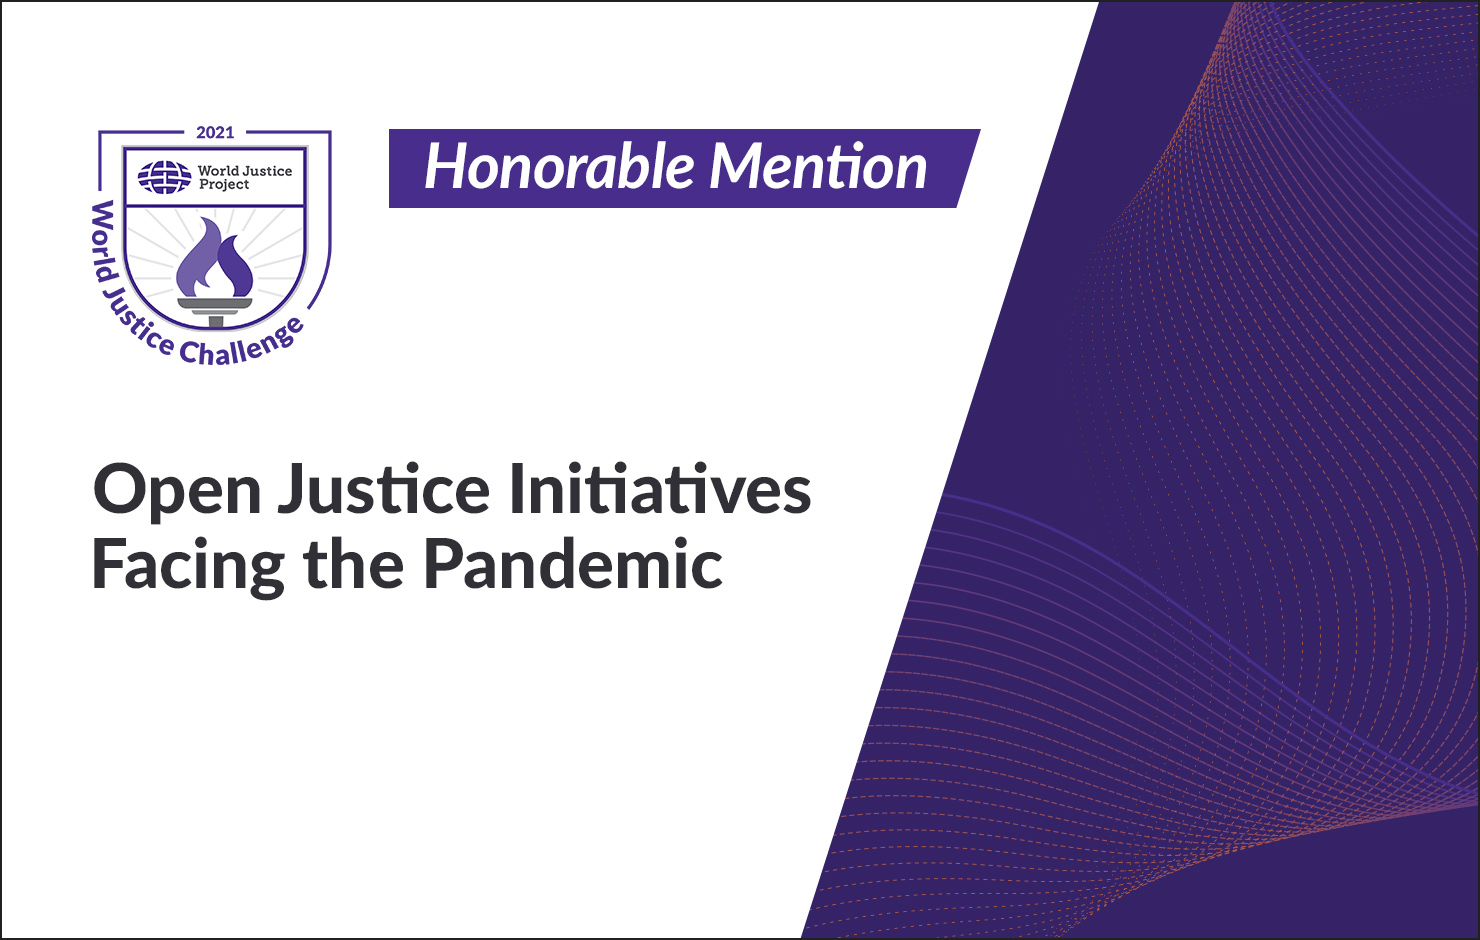 Open Justice Initiatives Facing the Pandemic